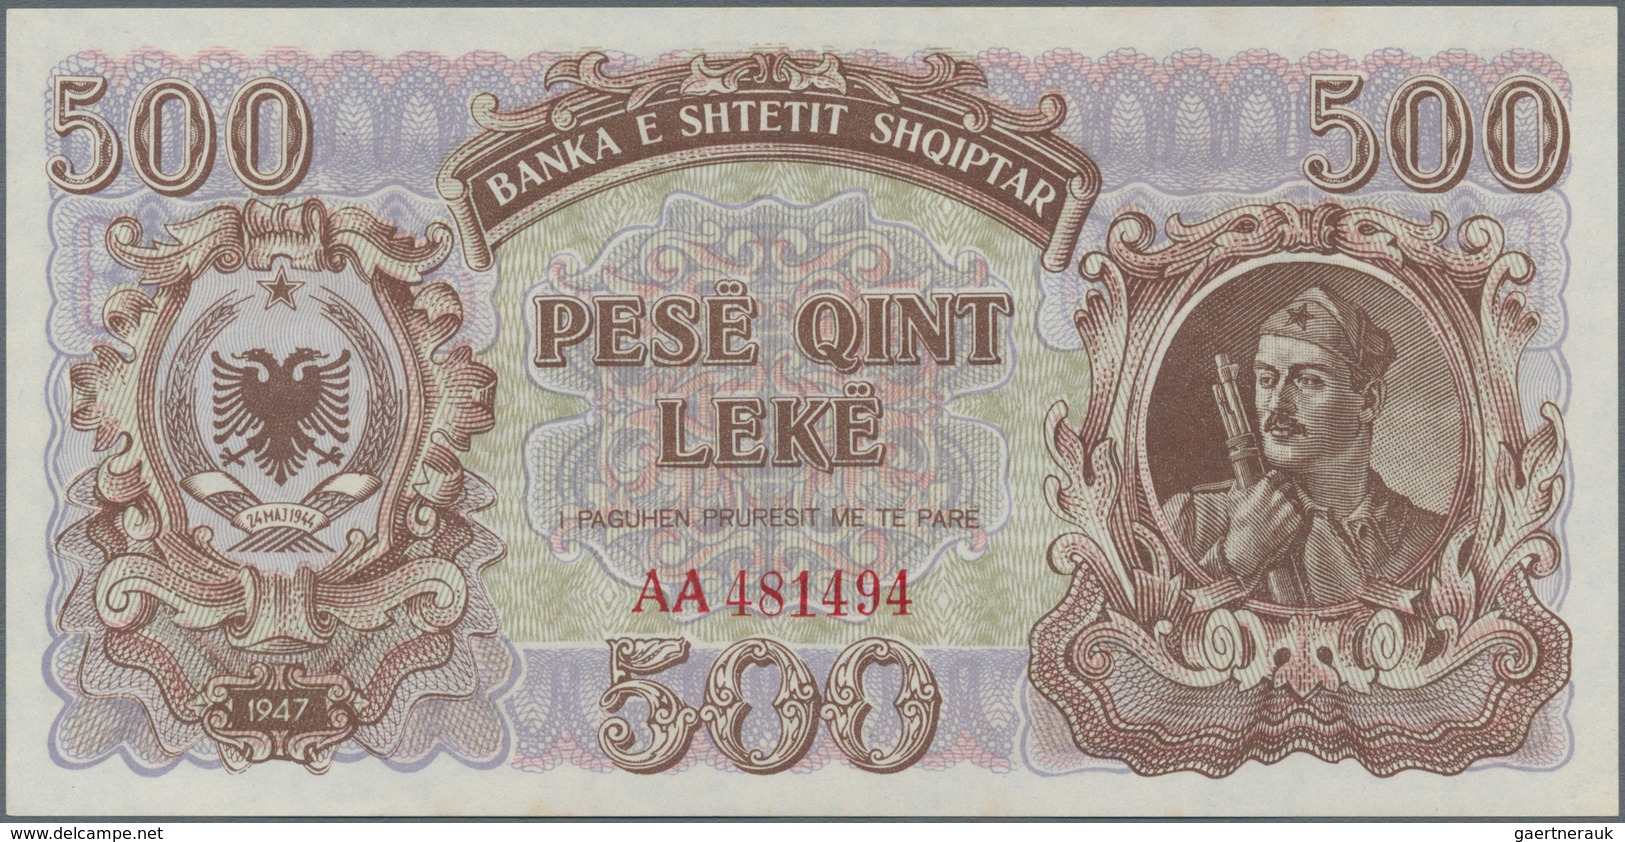 Albania / Albanien: 1947 "Soldier" Lek Issue with 10, 50, 100, 500 and 1000 Lek, P.19-23 in UNC cond